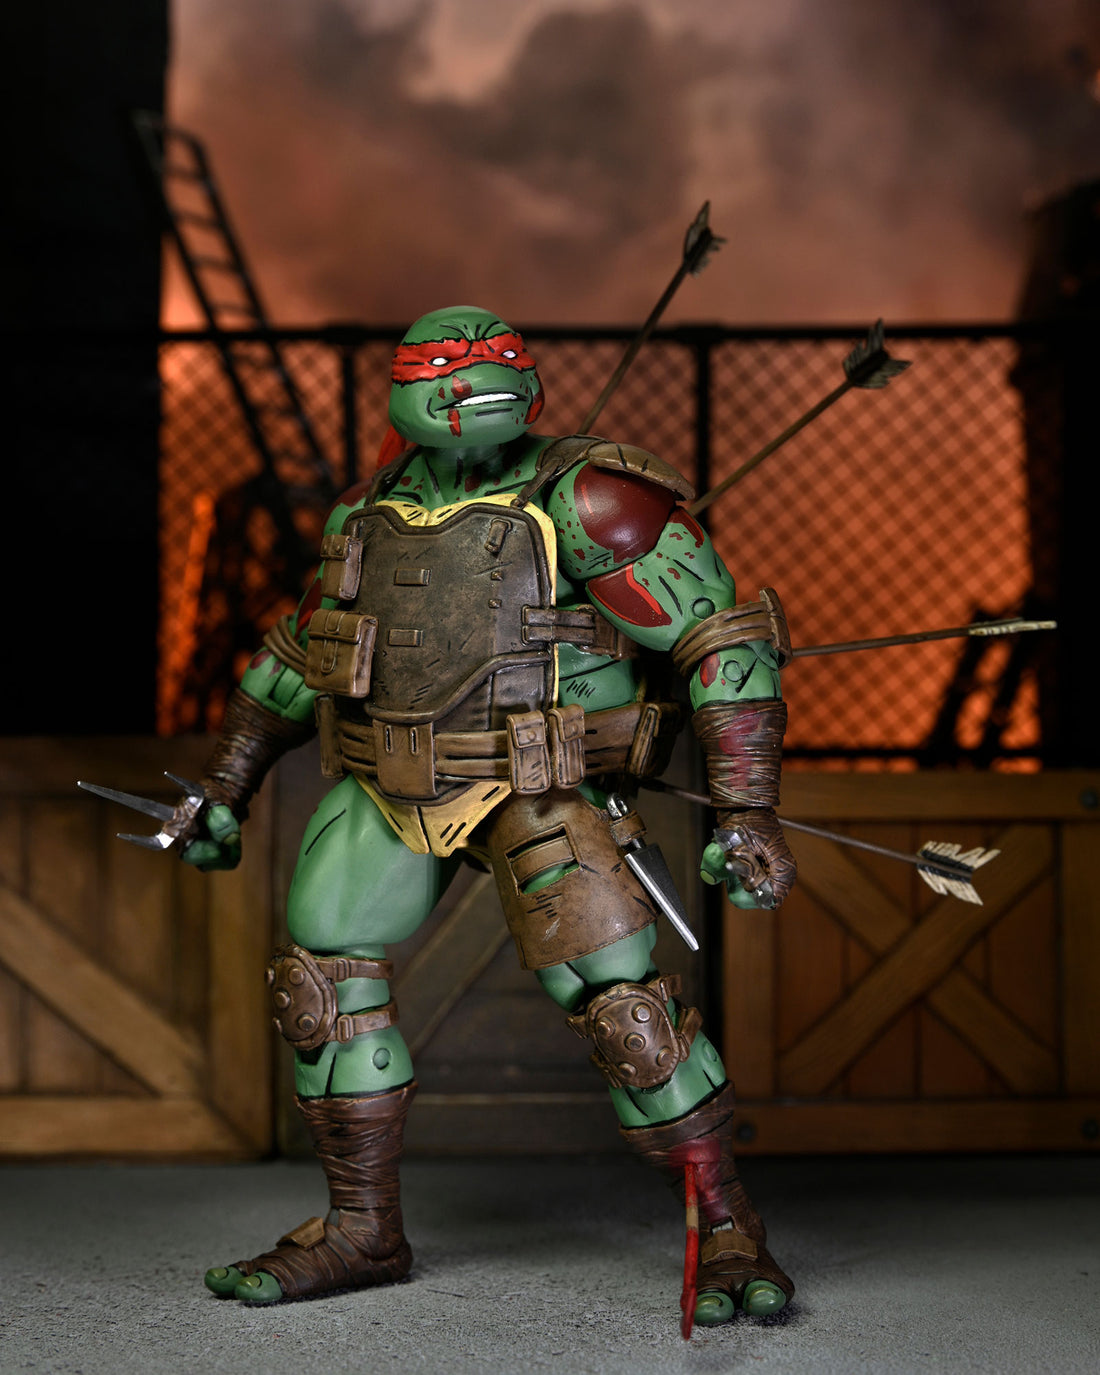 NECA Embraces the Way of the Turtle with New TMNT Releases